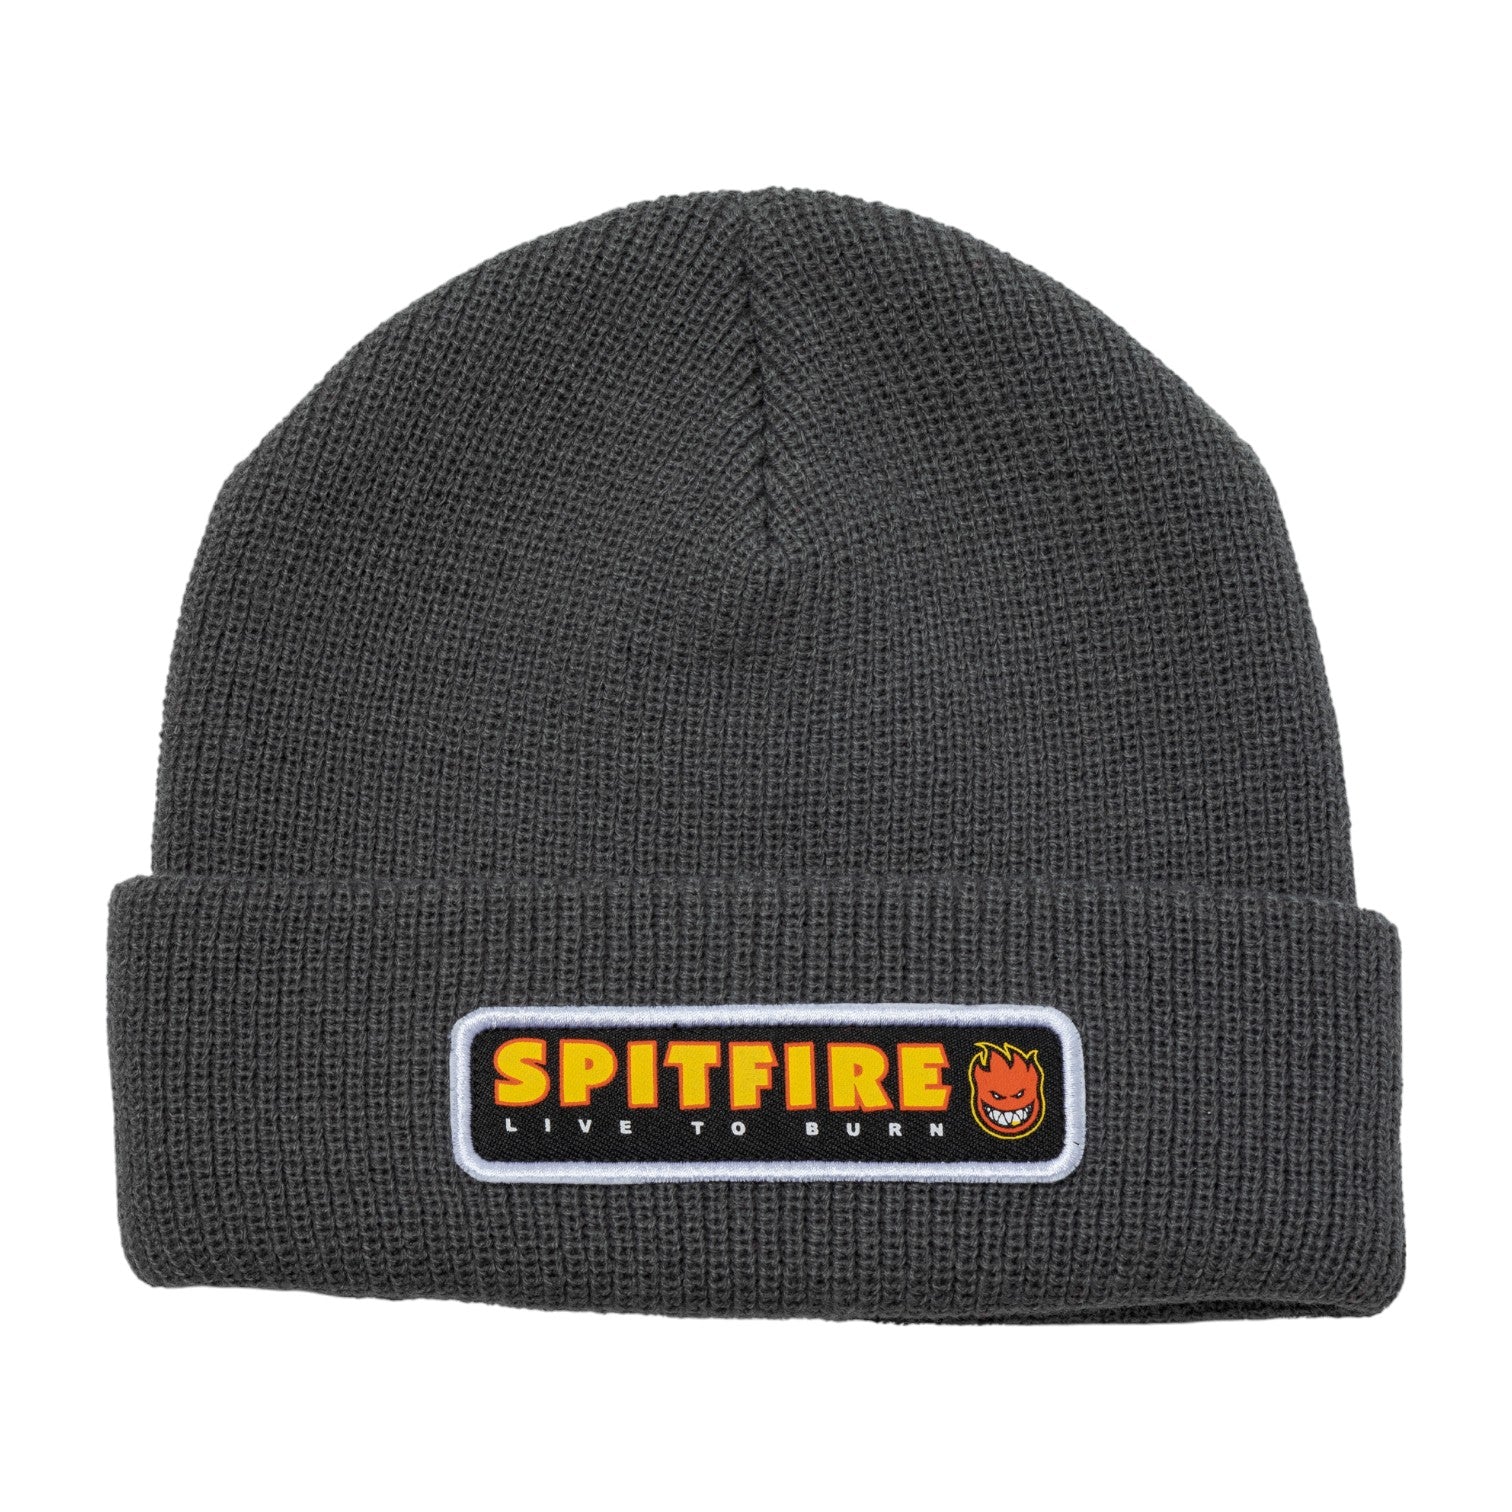 Spitfire LTB Patch Cuff Beanie - Charcoal